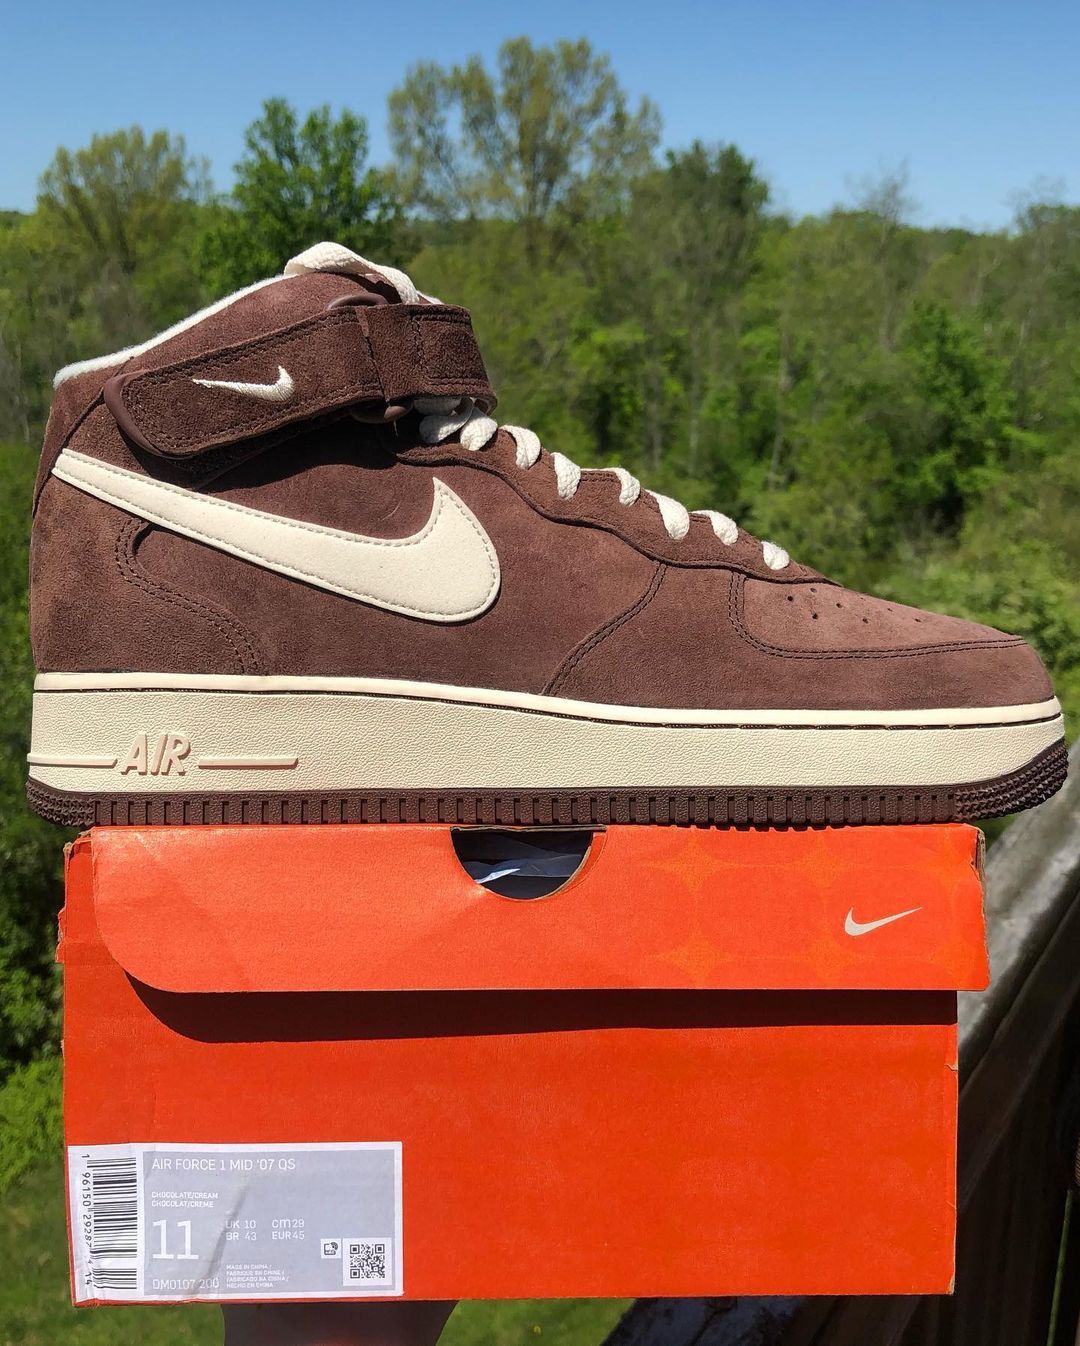 Nike Air Force 1 Mid Chocolate Cream DM0107 200 Release Date